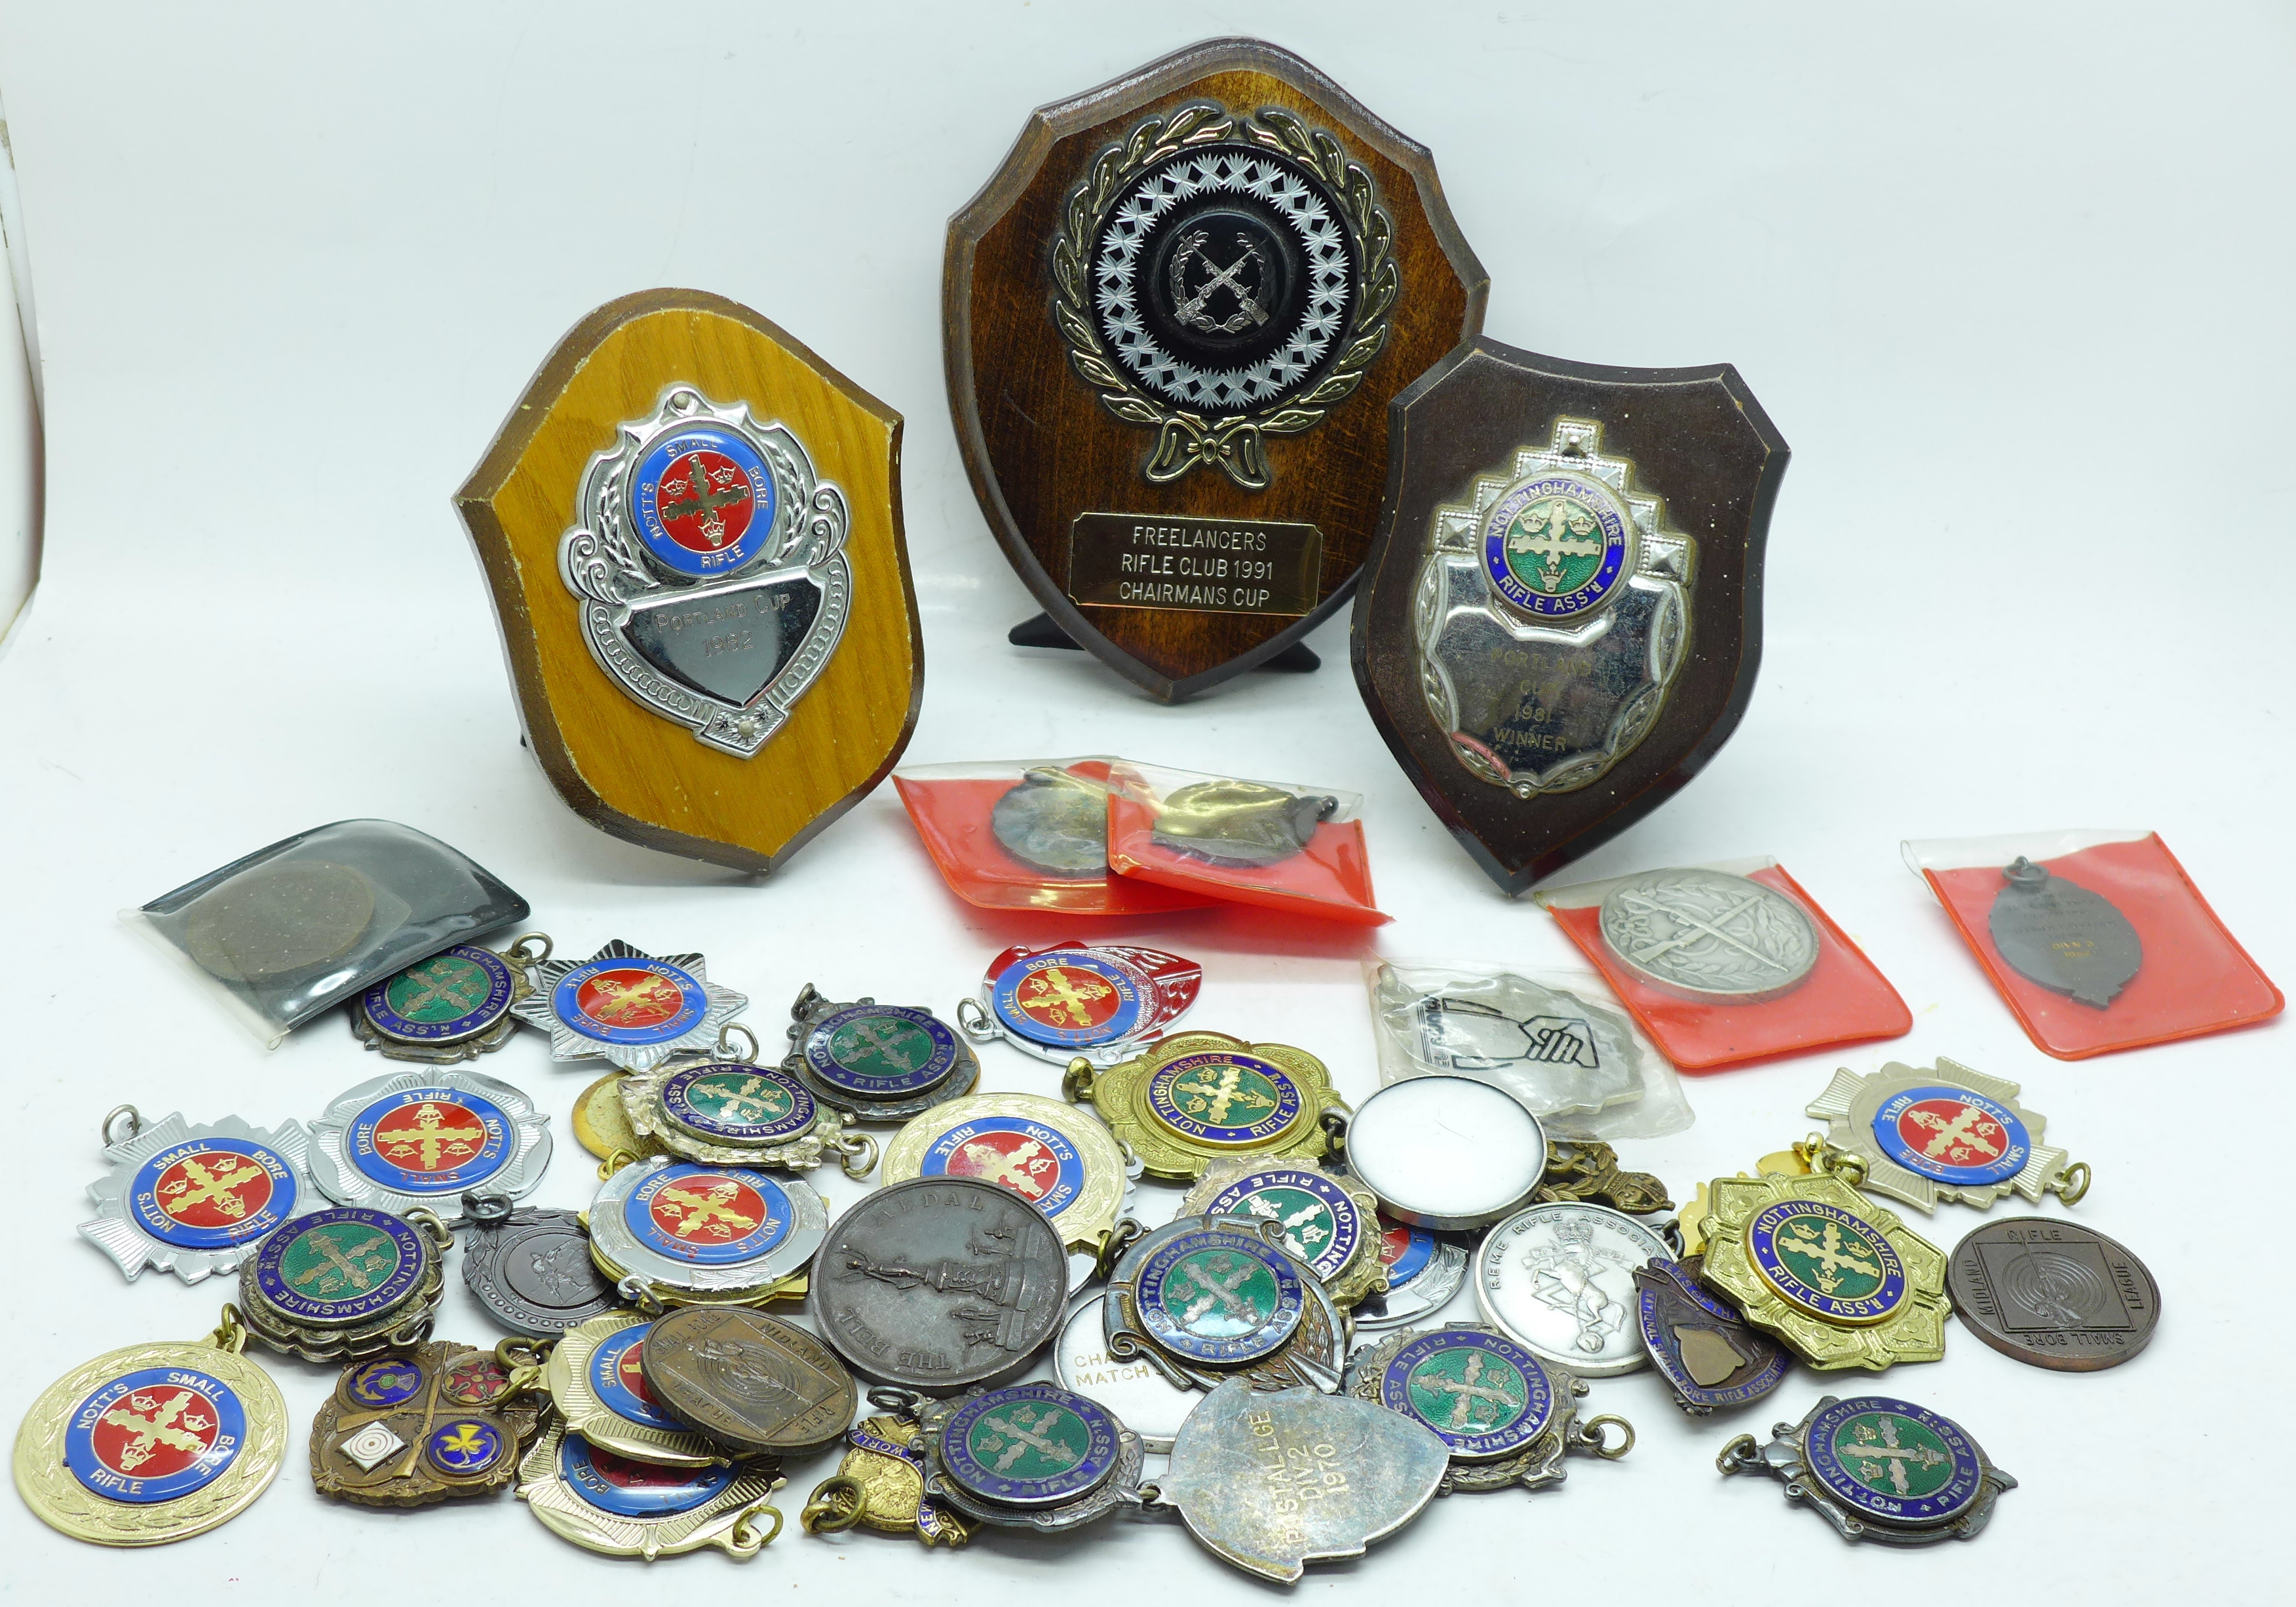 Shooting medals and medallions